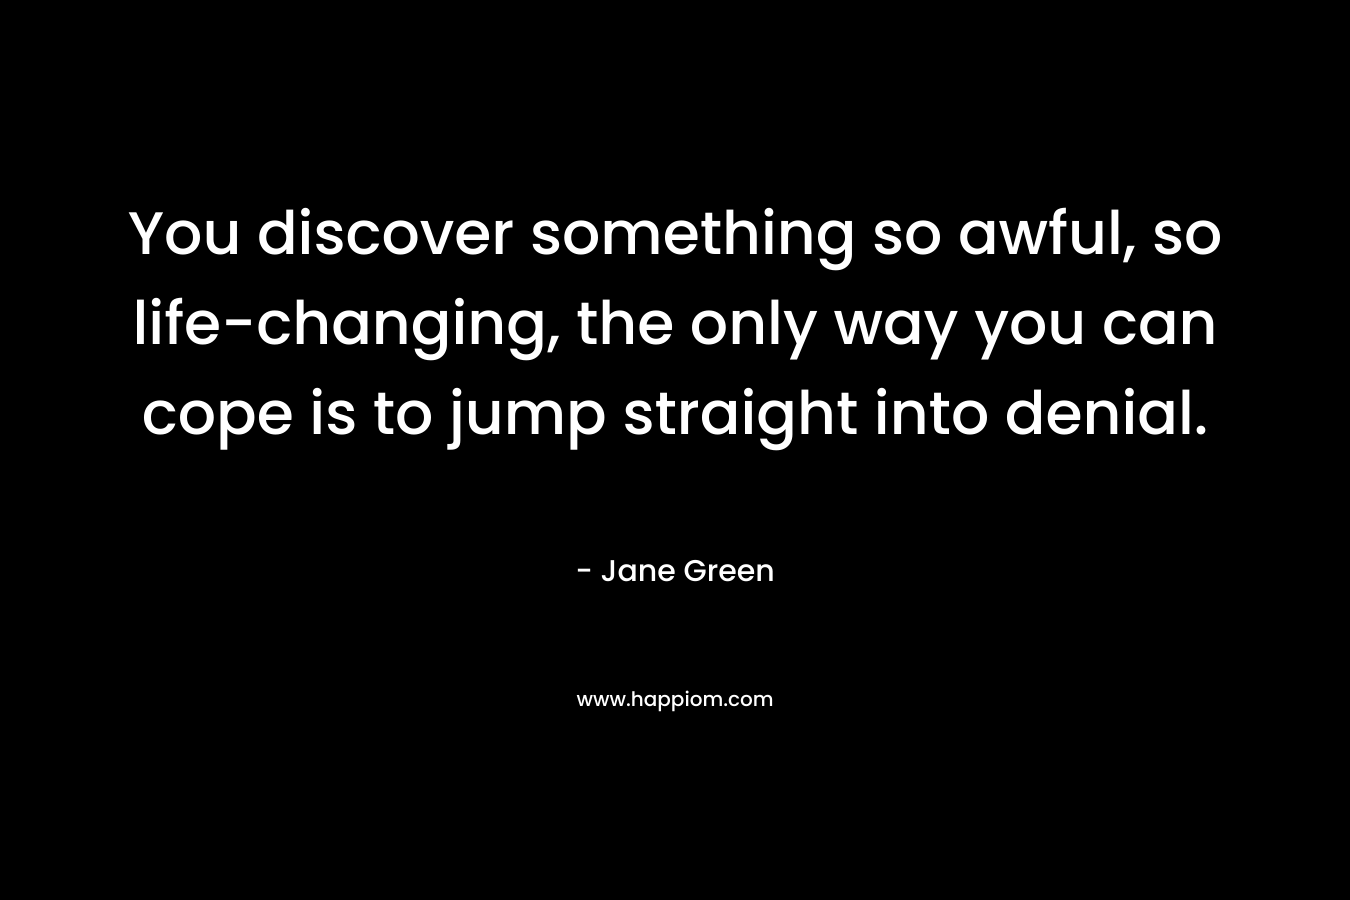 You discover something so awful, so life-changing, the only way you can cope is to jump straight into denial.